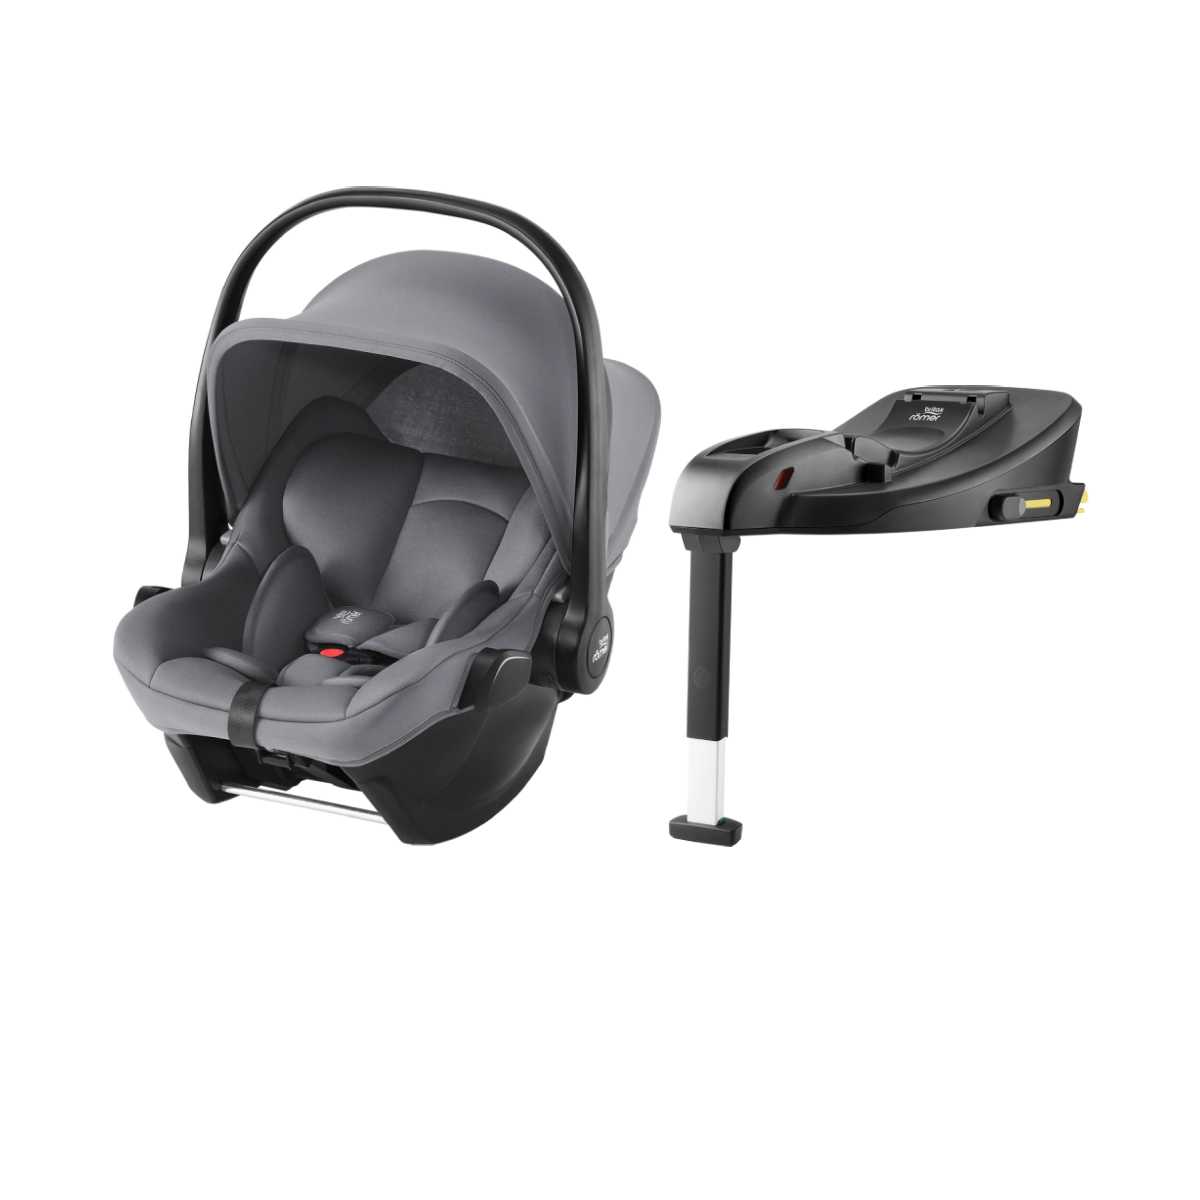 Britax Römer BABY-SAFE CORE Group 0+ Carseat with Isofix Base